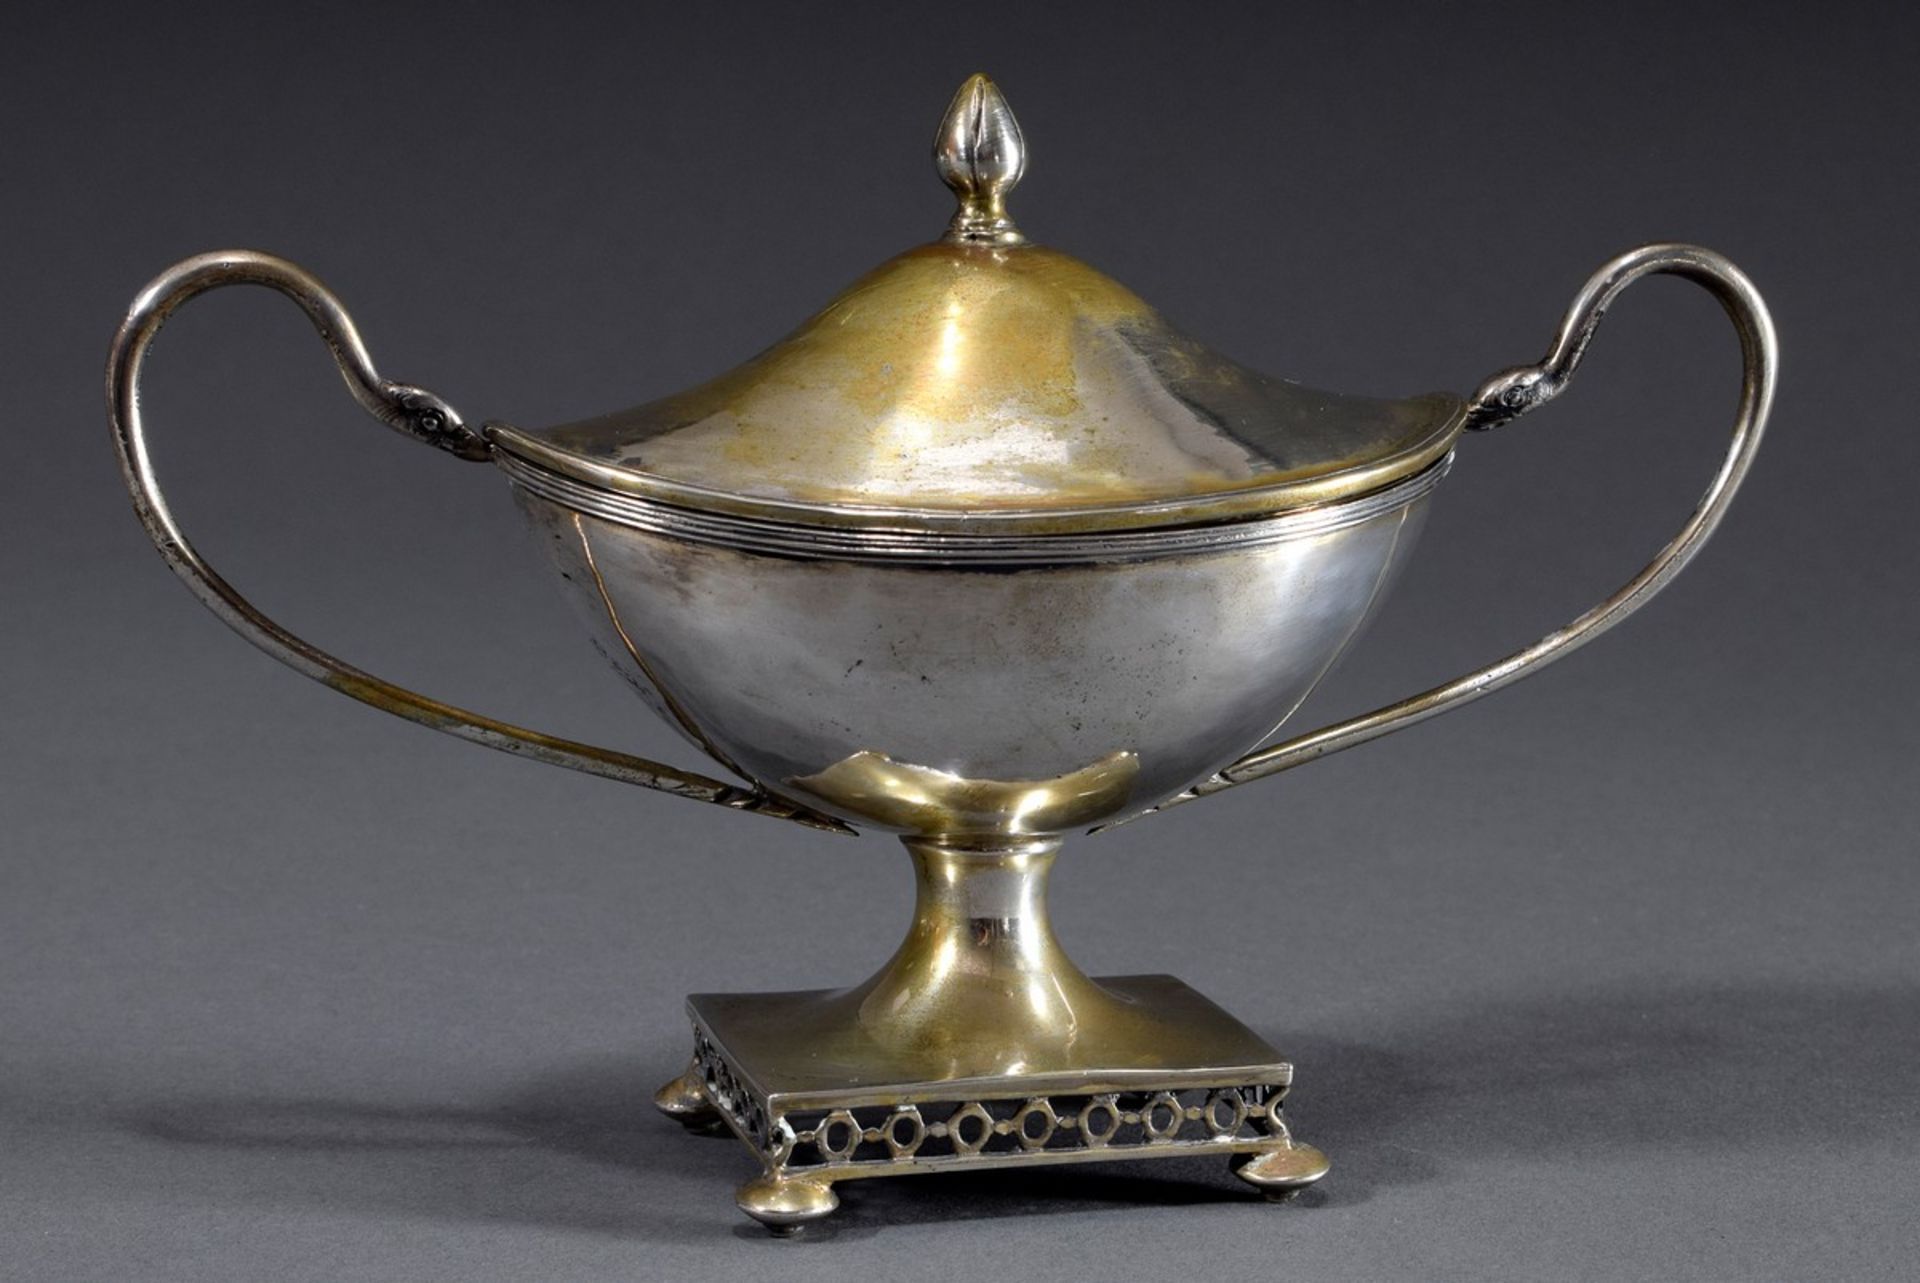 Empire façon lidded bowl with serpentine handles on the sides and openwork foot, B. Neresheimer & S